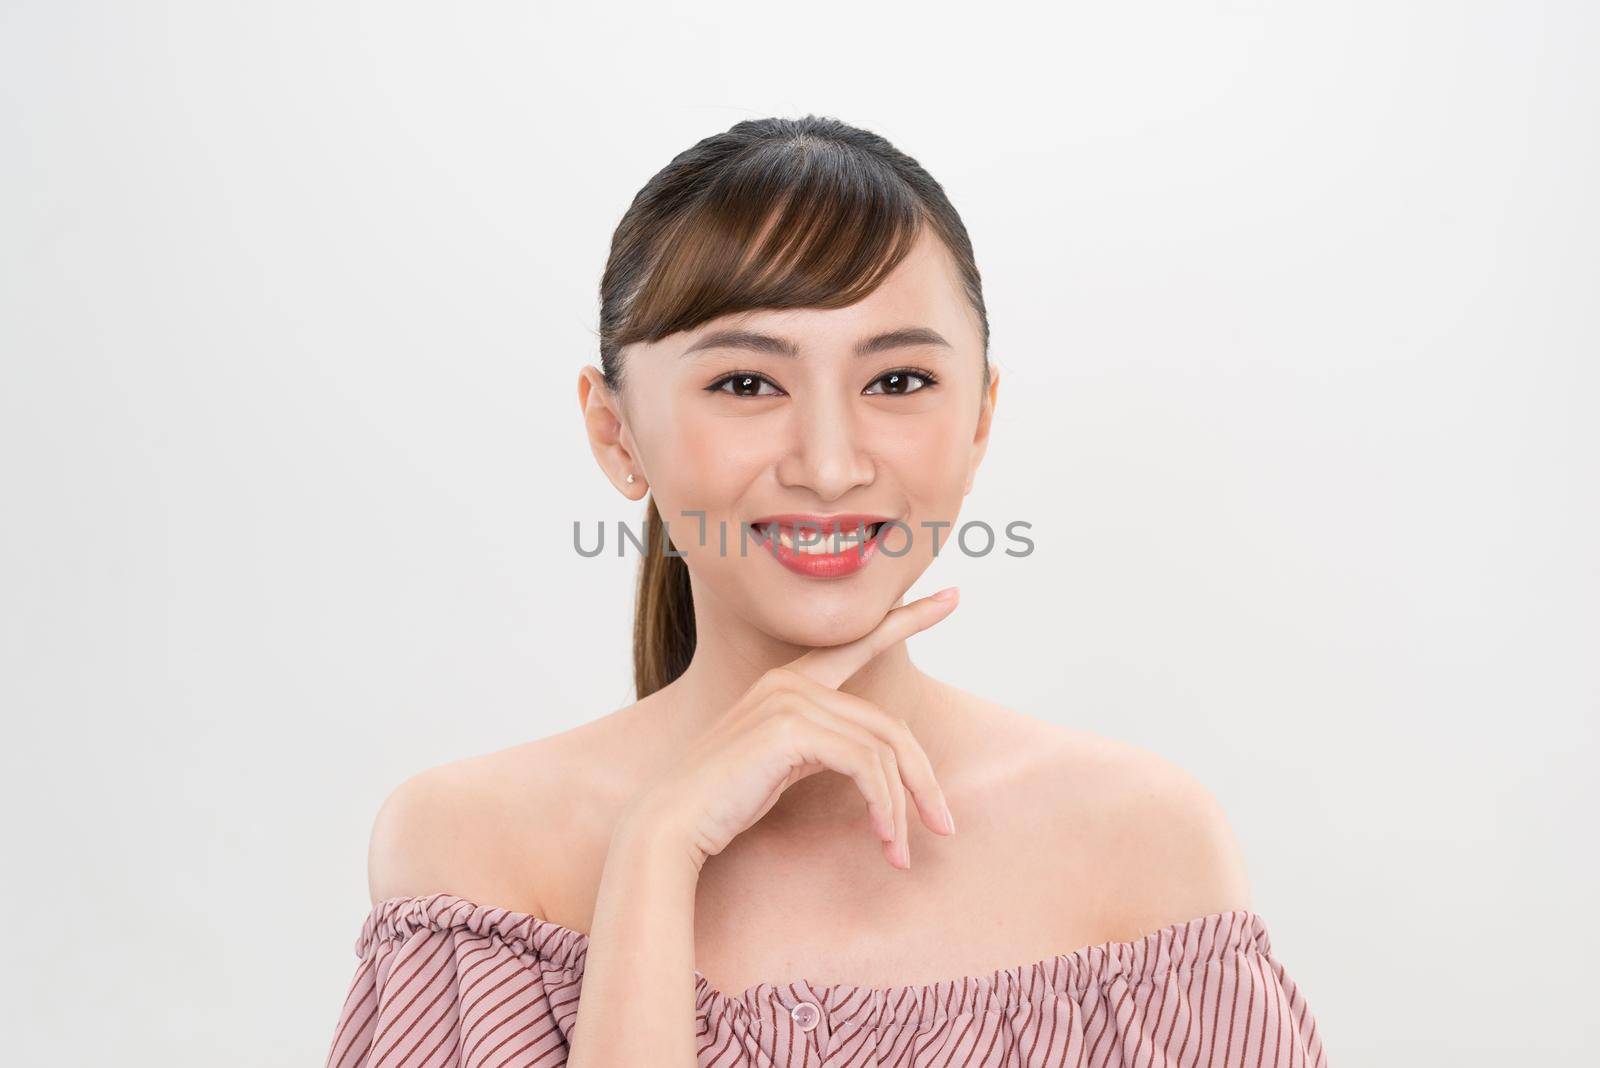 closeup young smiling woman face isolated on white